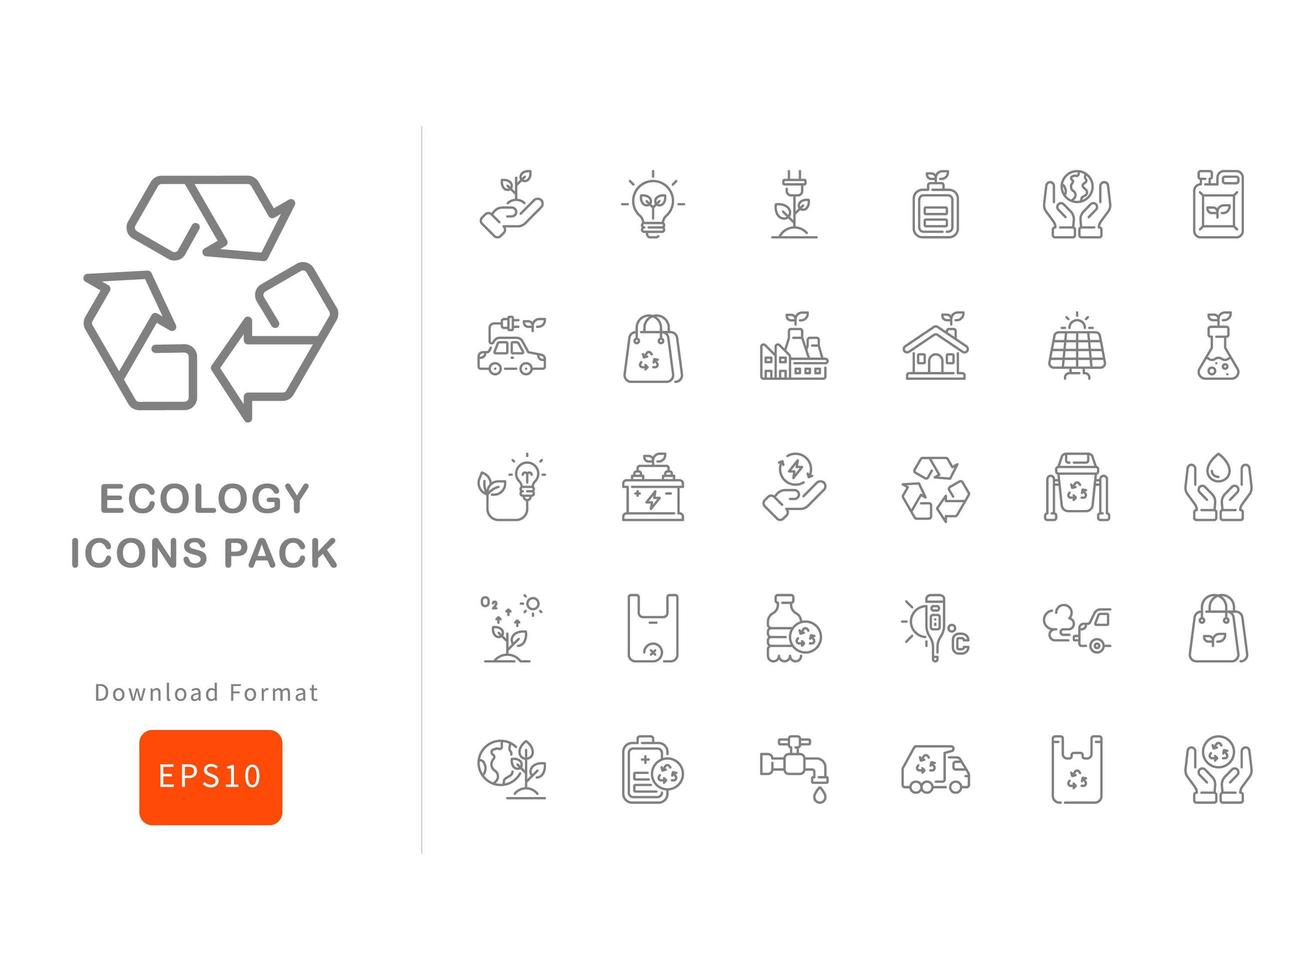 ecologie icon pack vector